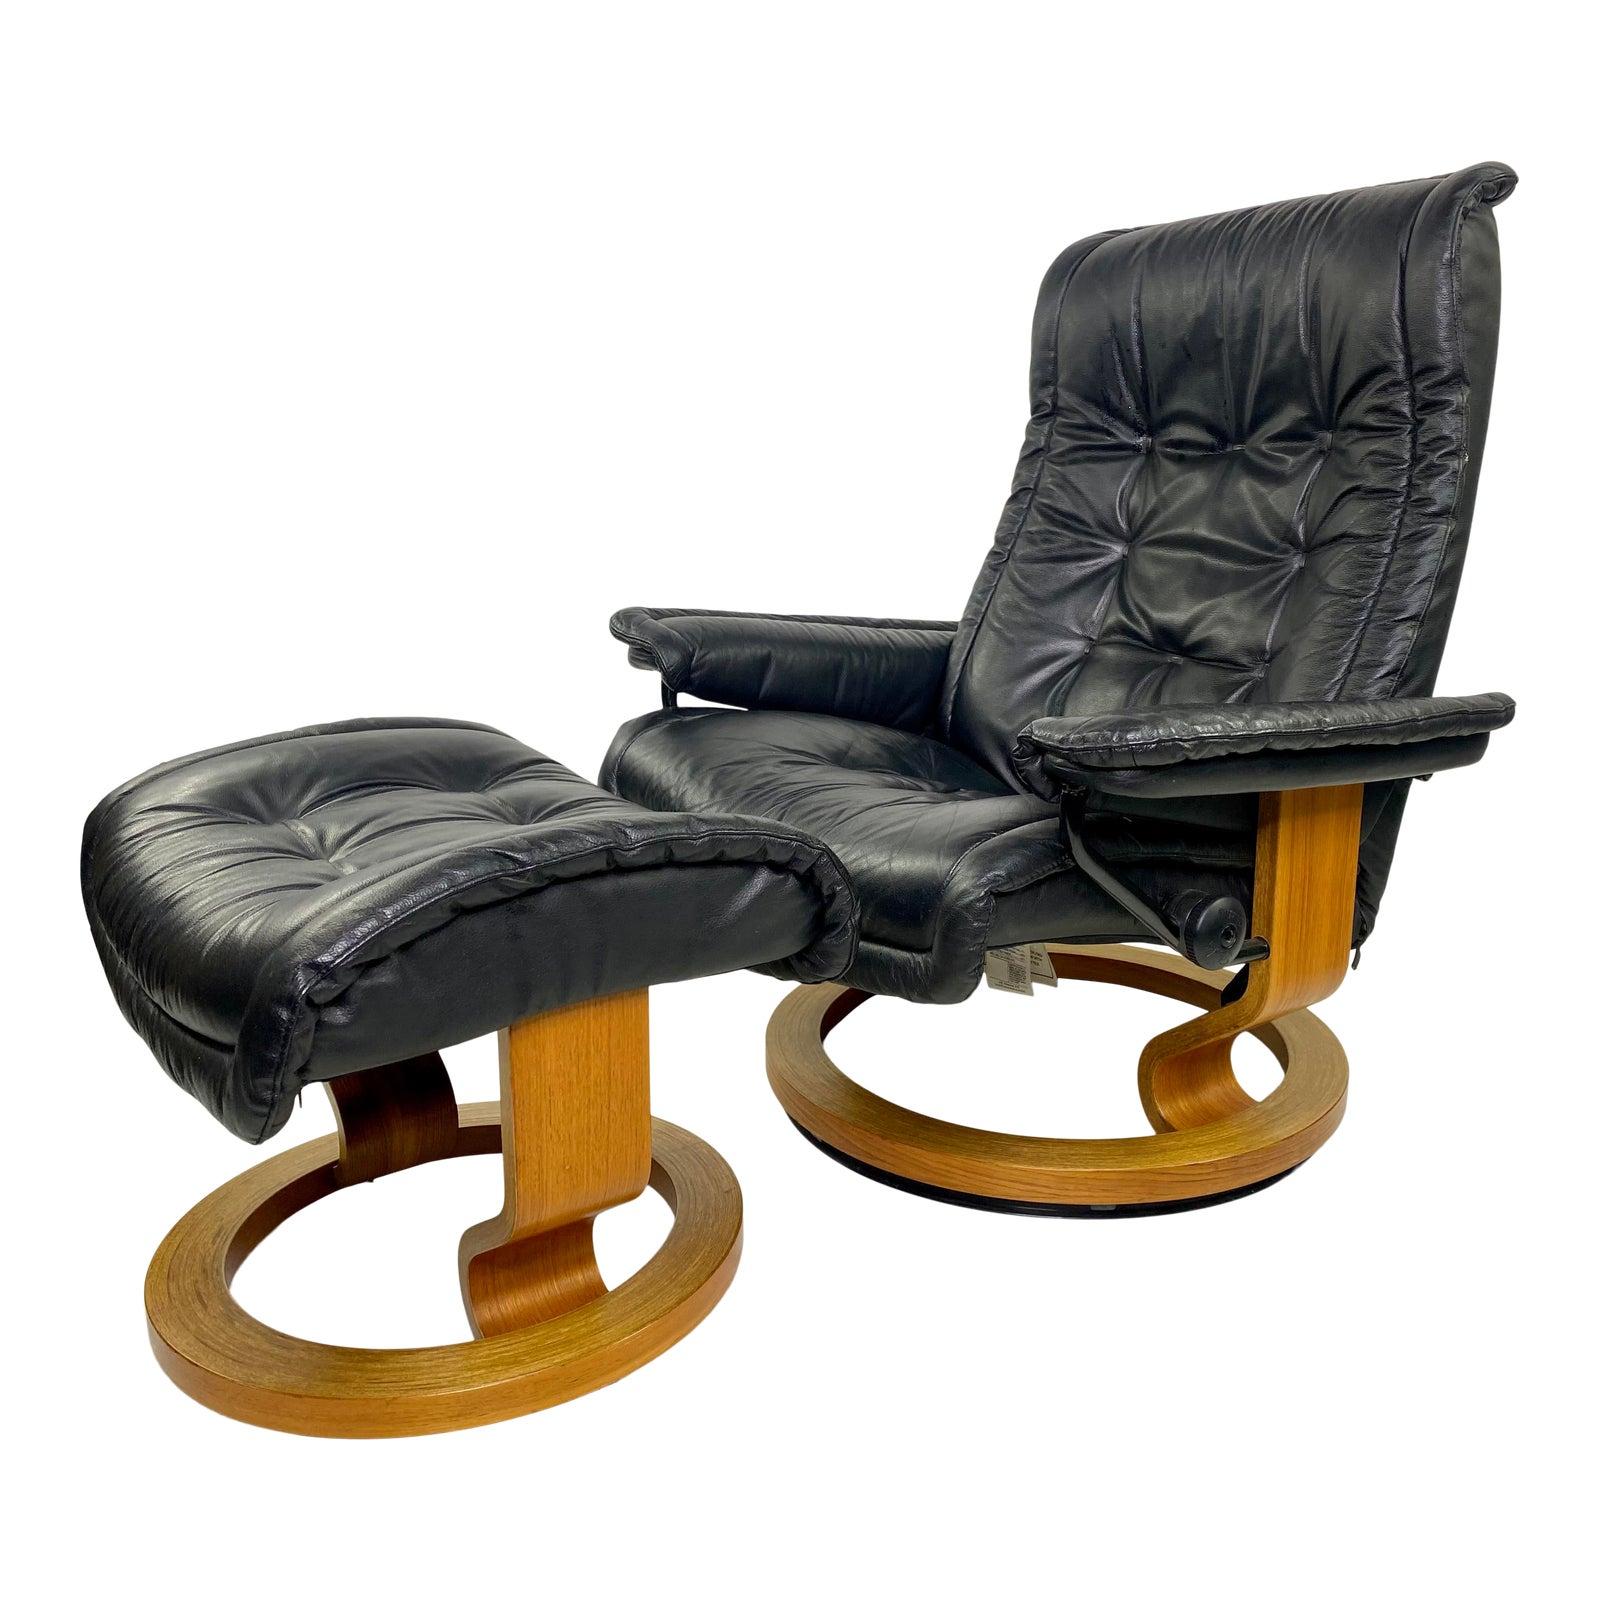 Stressless Recliner Chair And Ottoman, Black Leather Recliner Chairs